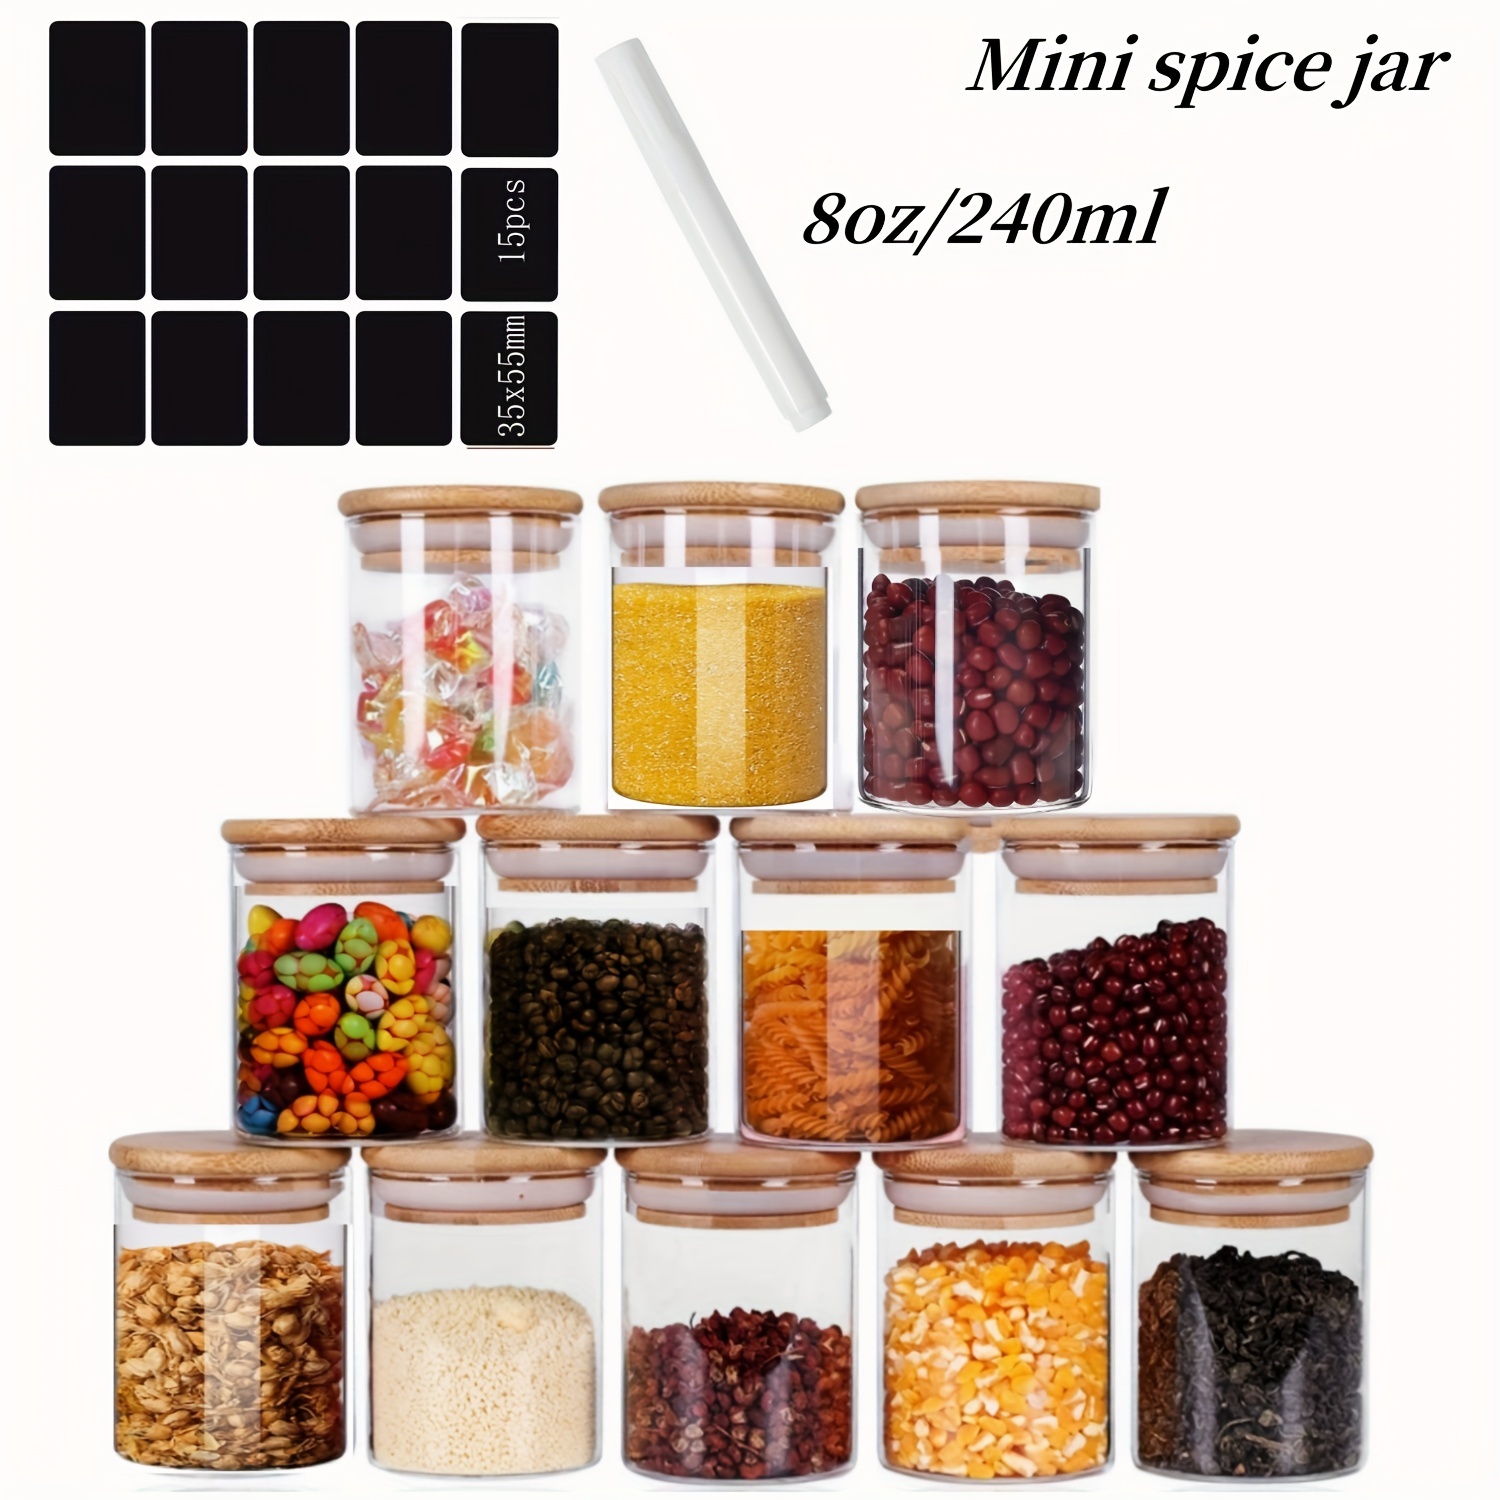 

12pcs, Glass Storage Jars With Airtight Bamboo Lids, Borosilicate Canning Jars, Kitchen Organizer For Grains, Spices, Herbs, Inclusive Of Labels & Pen, Multi-purpose Glass Jar Gift Box